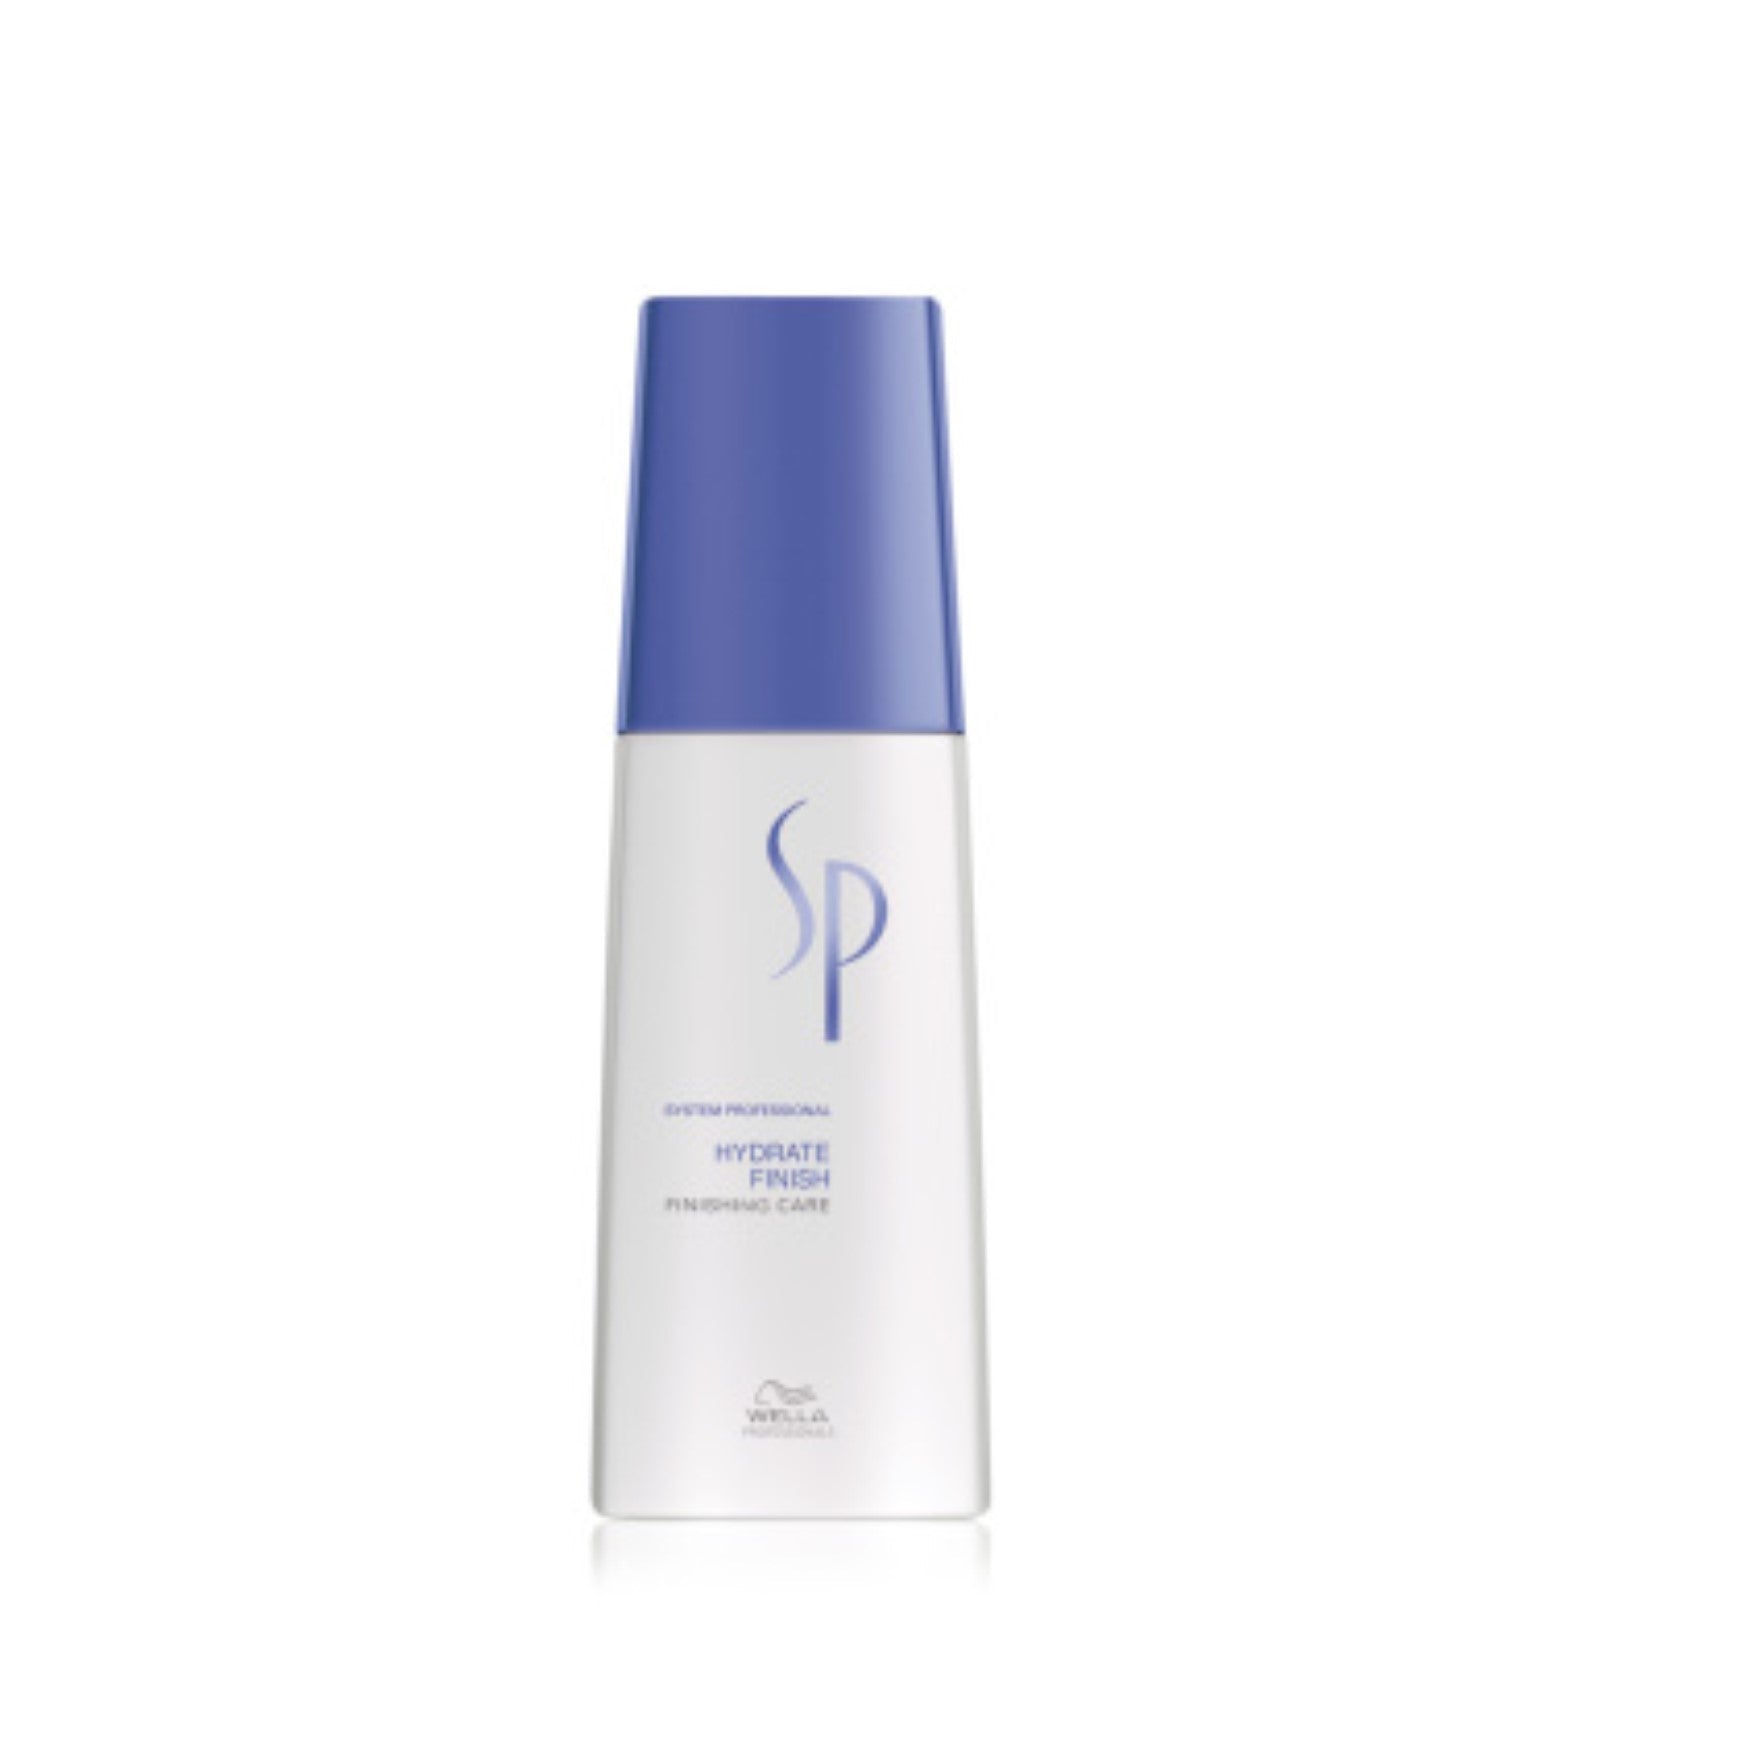 Wella SP Classic Hydrate Finish Finishing Care 125ml - On Line Hair Depot